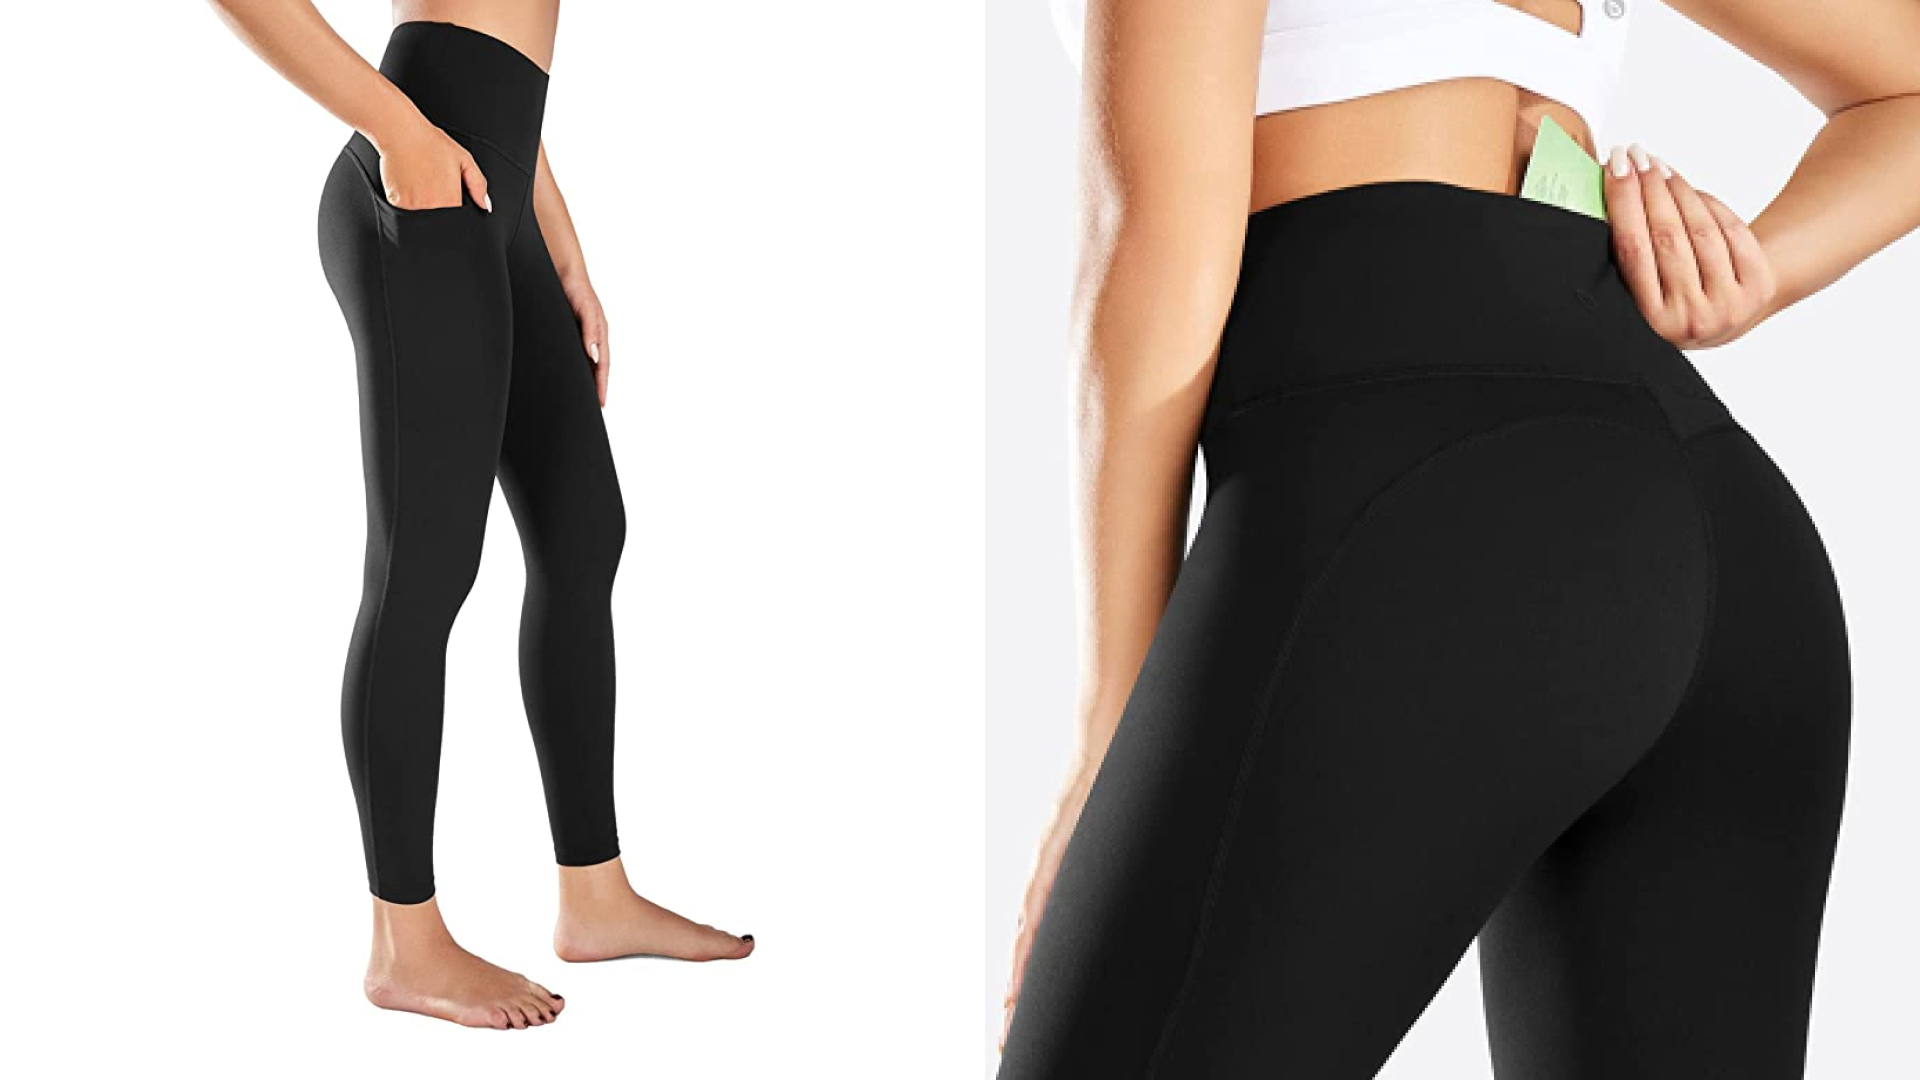 Our Favorite Leggings to Work Out, Lounge, and Live In